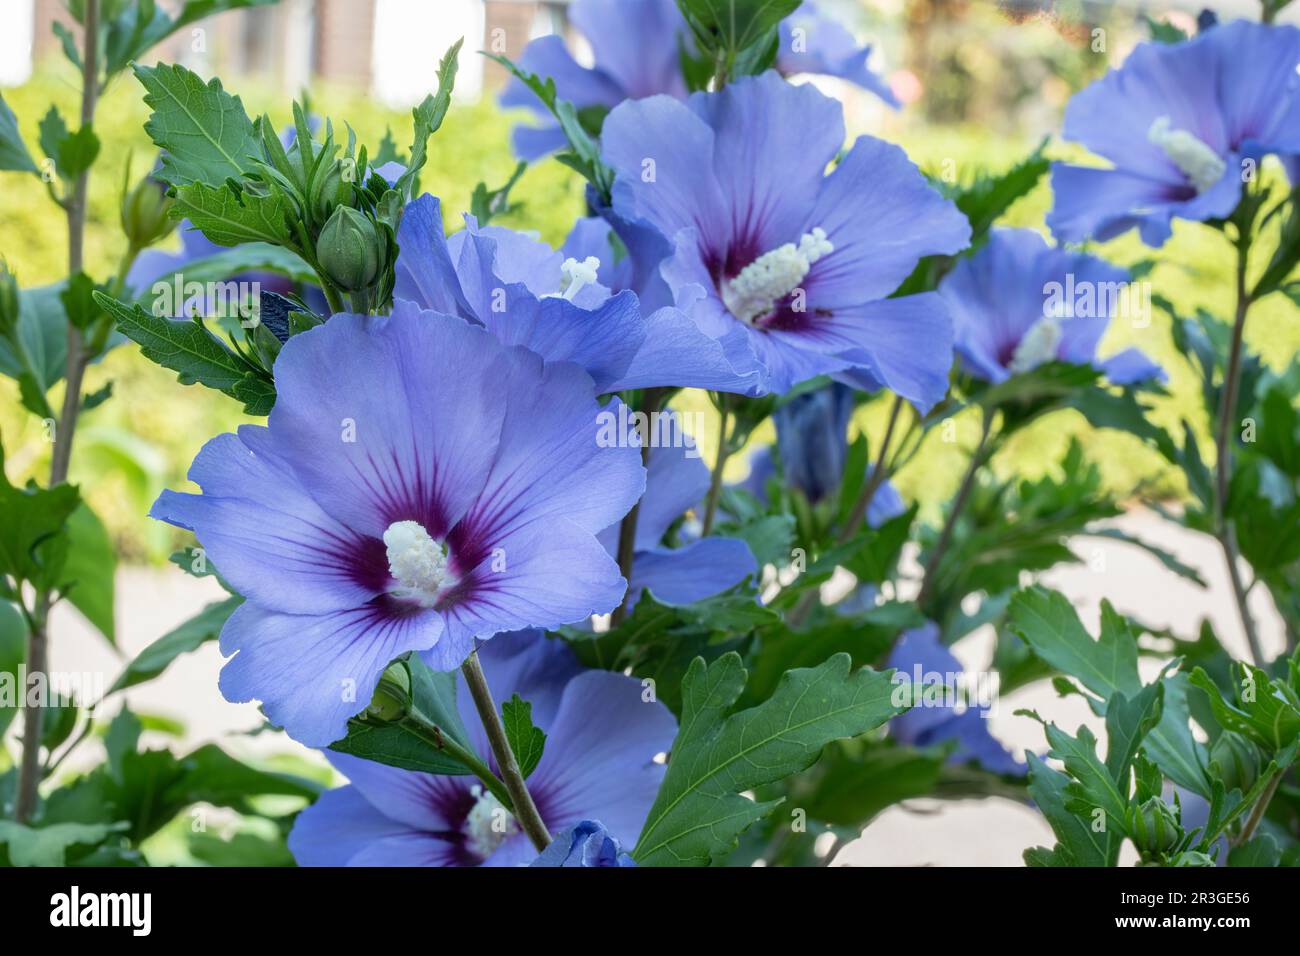 Two Hibiscus flowers in the garden Stock Photo